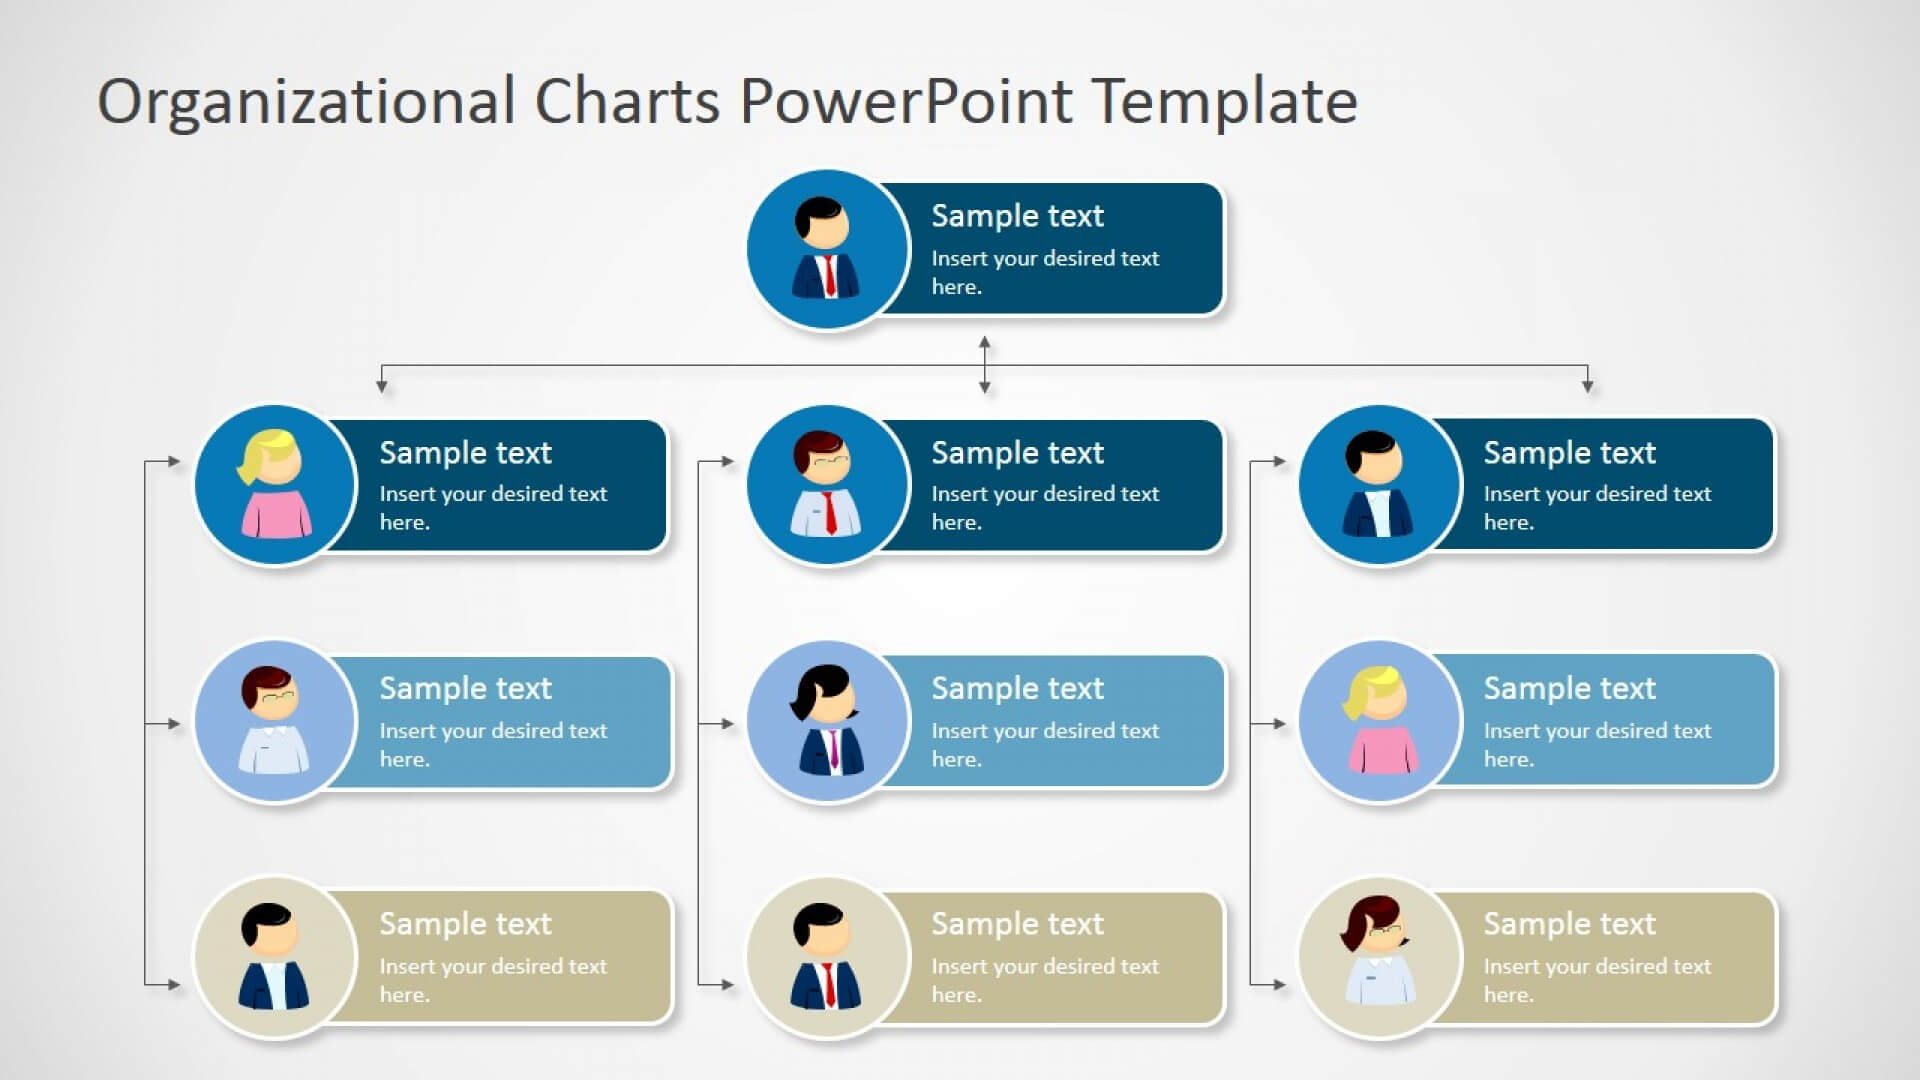 017 Microsoft Org Chart Template Powerpoint Organizational With Microsoft Powerpoint Org Chart Template